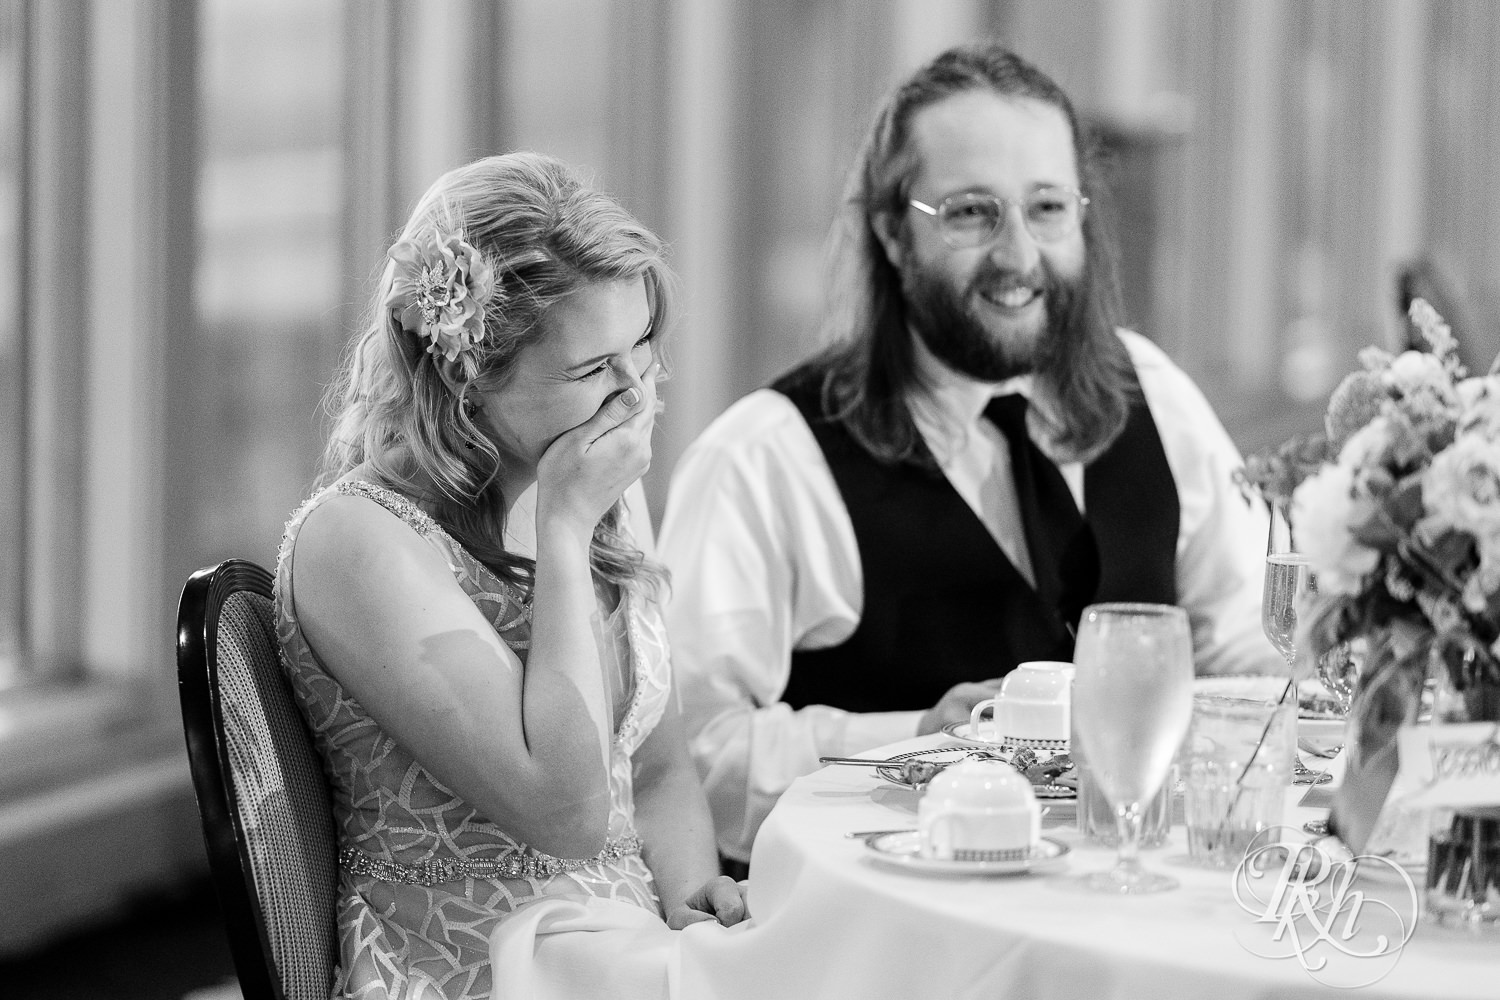 Bride laughs at reception at Rush Creek Golf Club in Maple Grove, Minnesota.